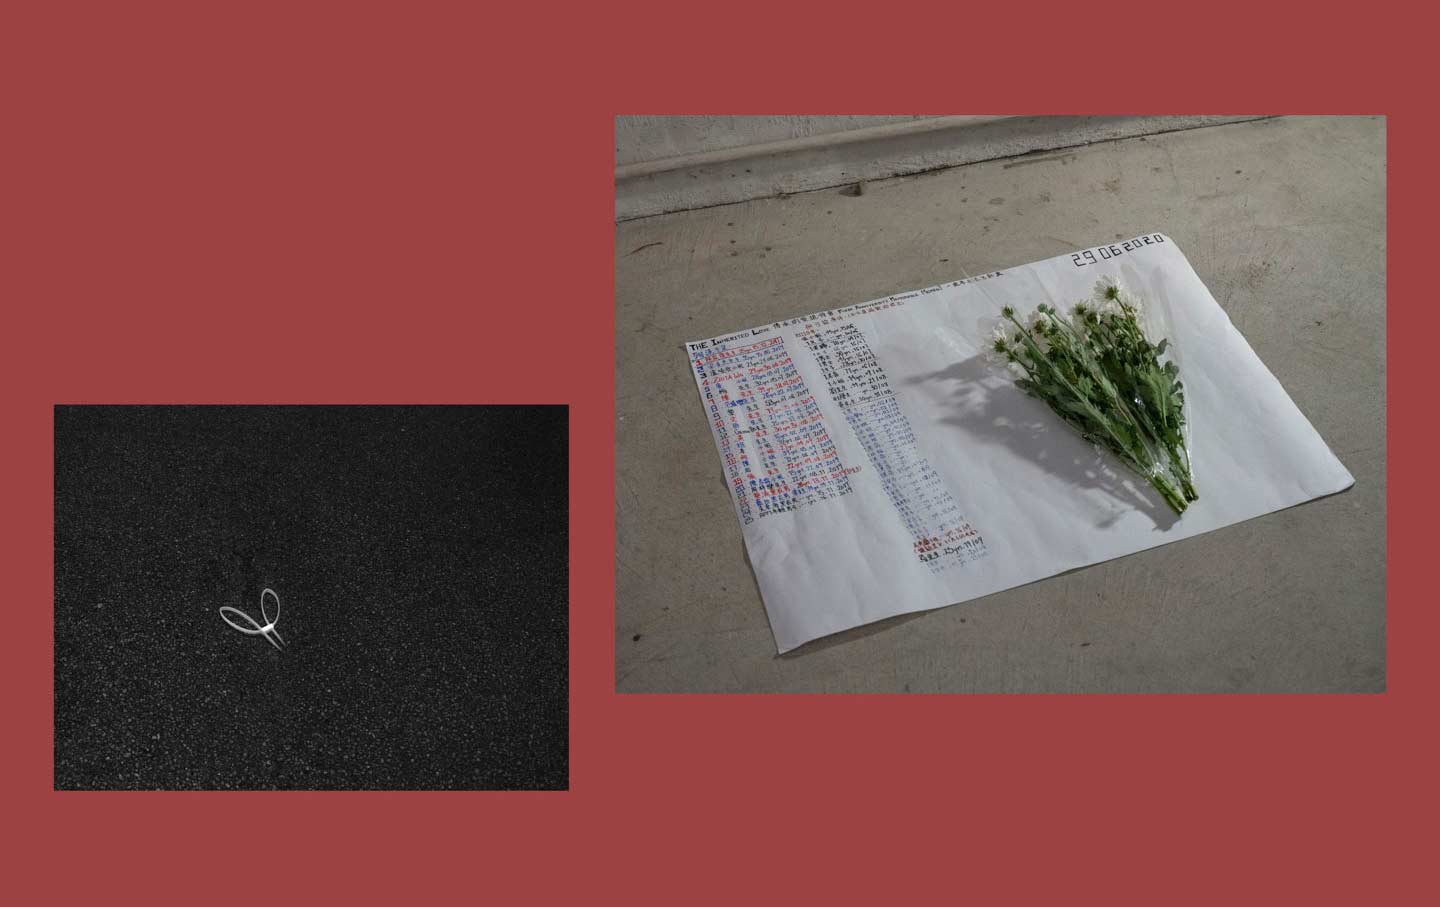 Hong Kong’s Protesters Are Writing Their ‘Last Letters’